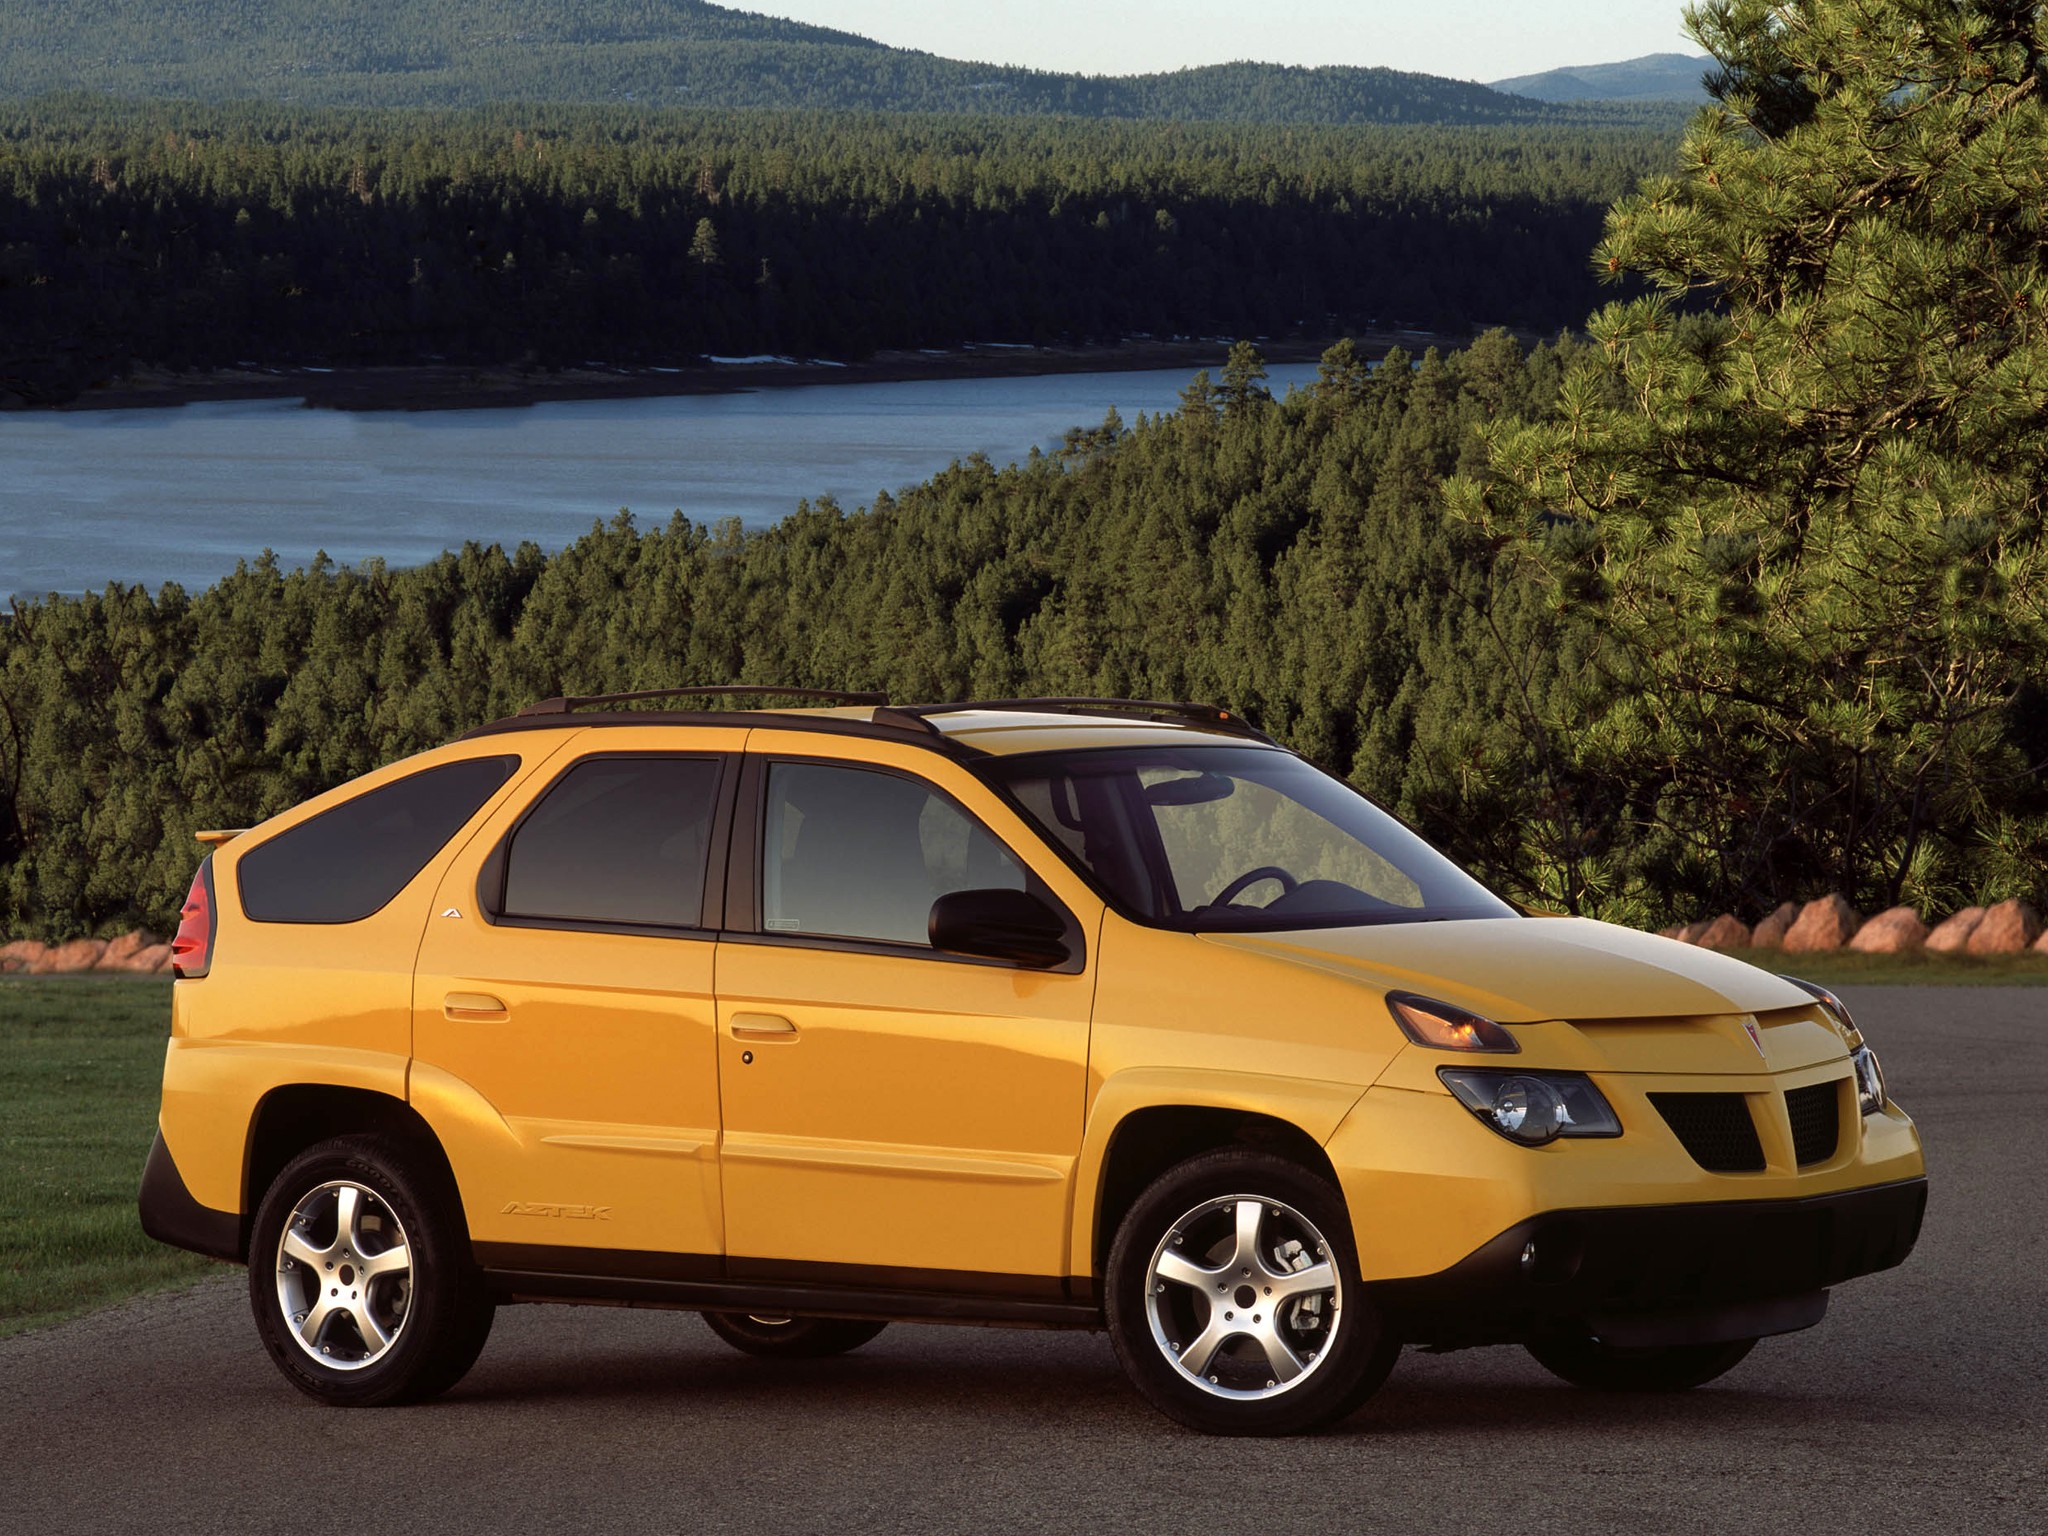 five-reasons-why-the-pontiac-aztek-doesn-t-deserve-all-the-hate_1.jpg